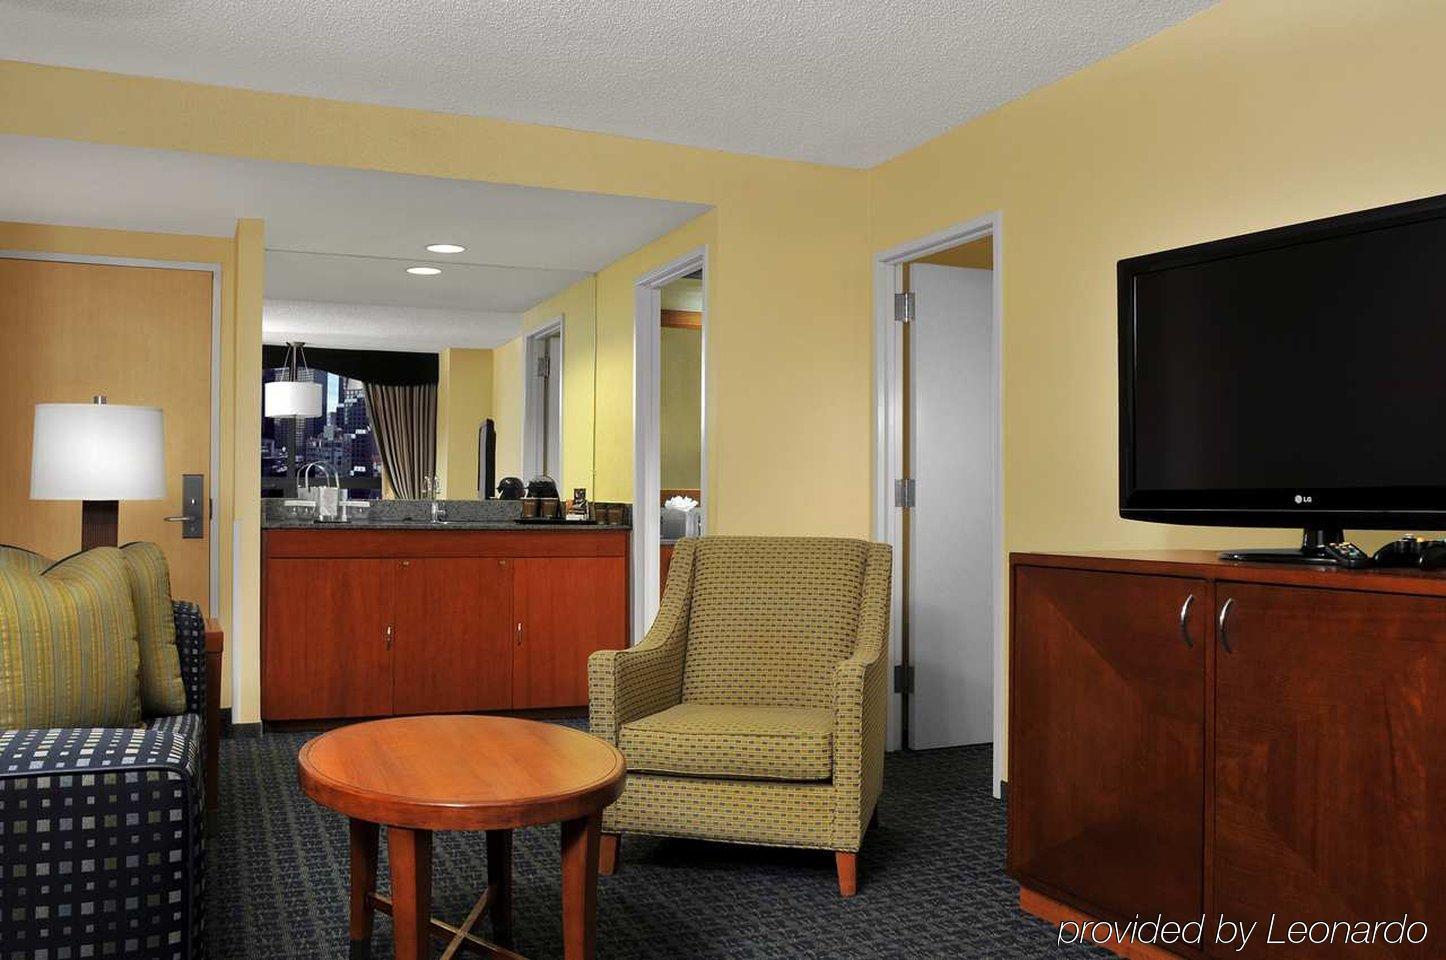 Doubletree Suites By Hilton Nyc - Times Square New York Chambre photo